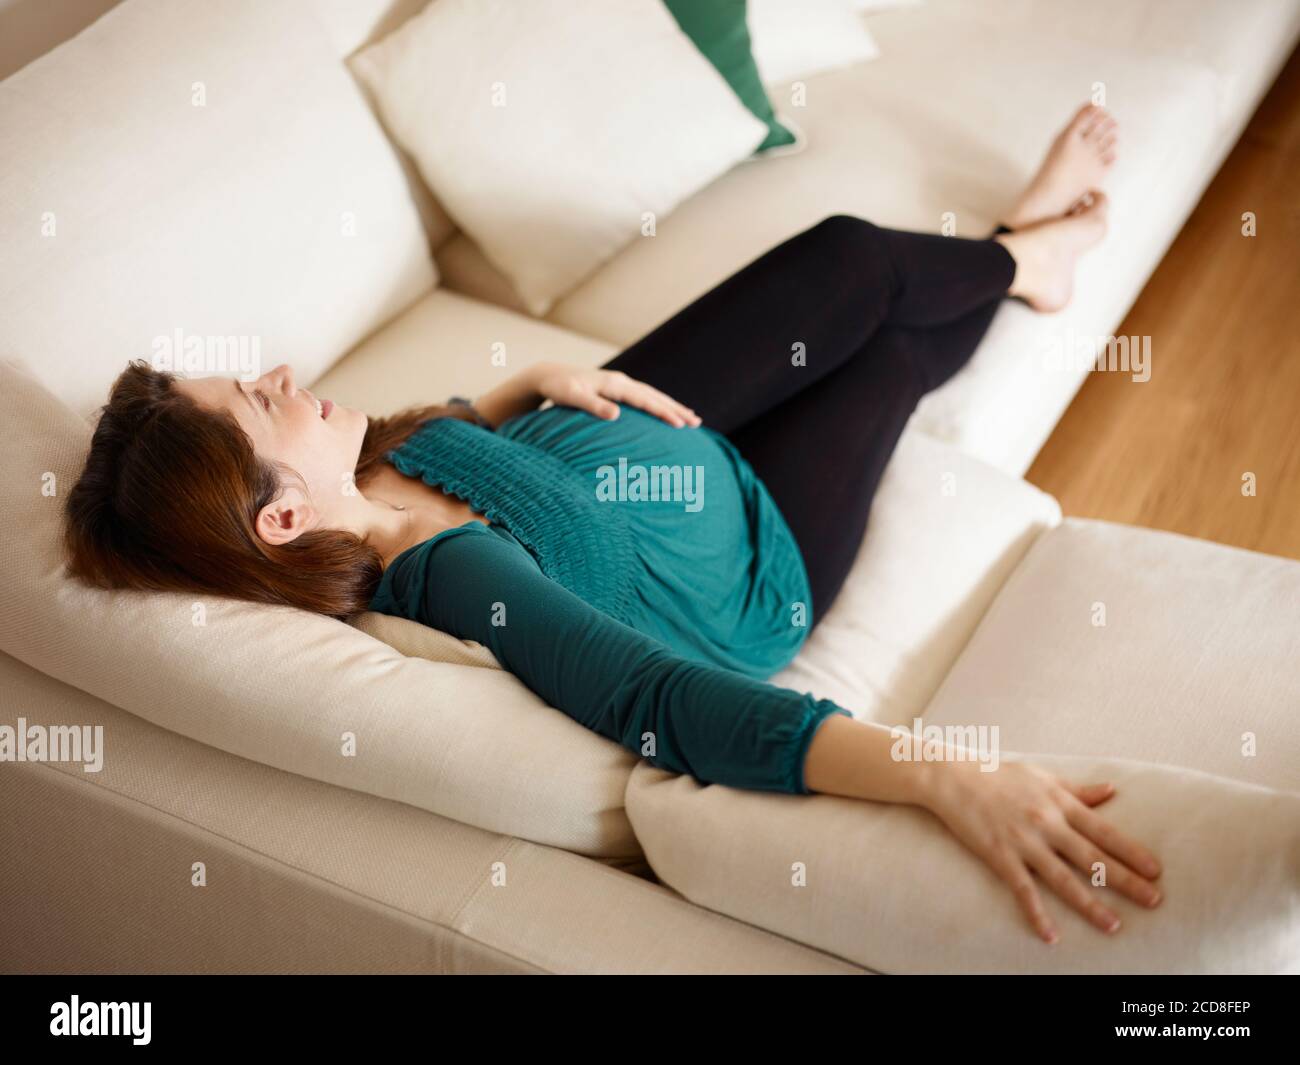 Young Pregnant Woman Lying On Couch And Touching Stomach Stock Photo